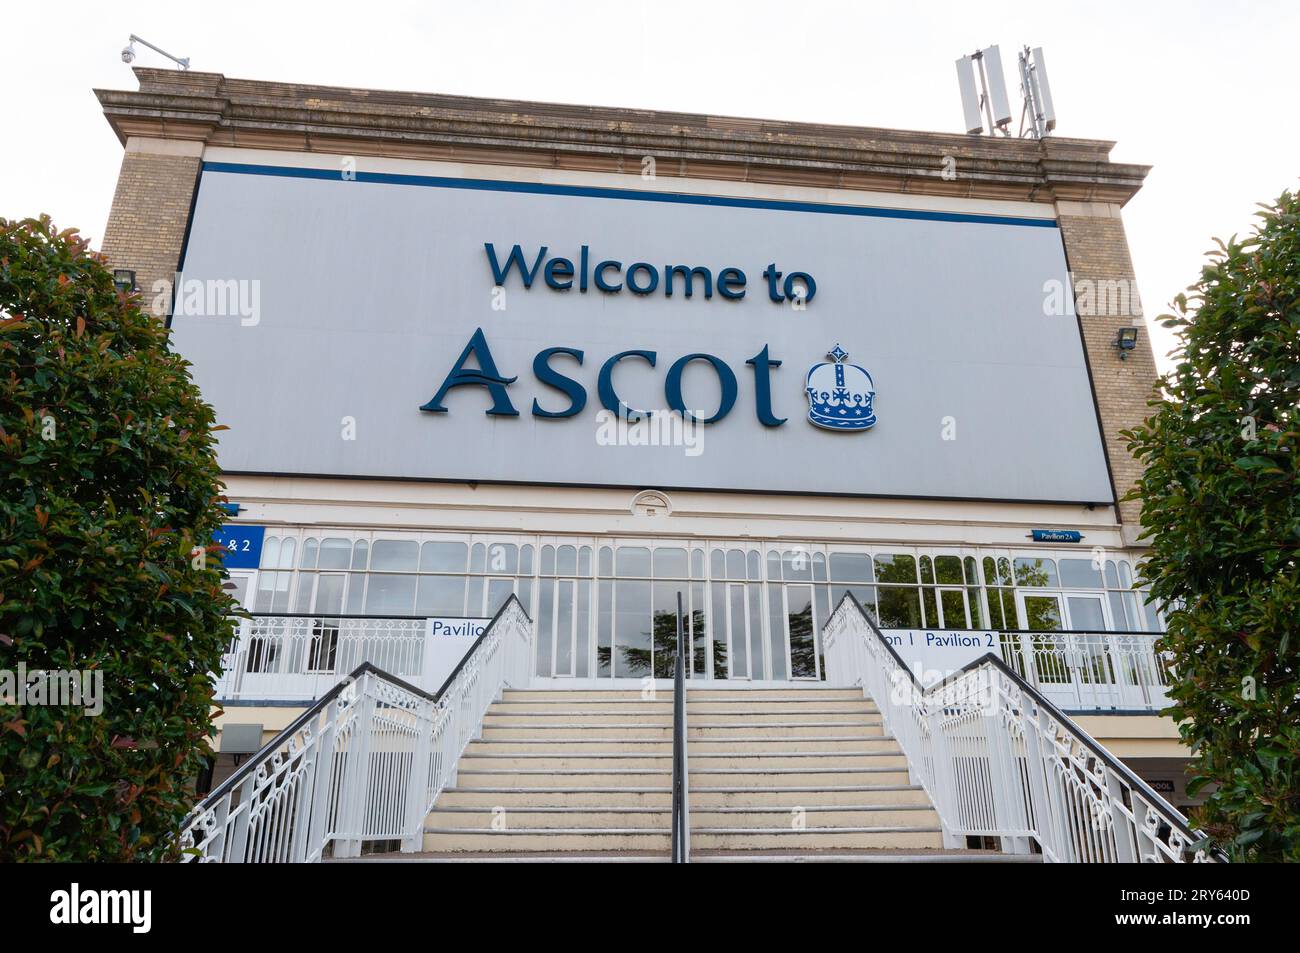 Welcome to Ascot sign. Pavilion at Royal Ascot racecourse, Royal Berkshire, UK Stock Photo